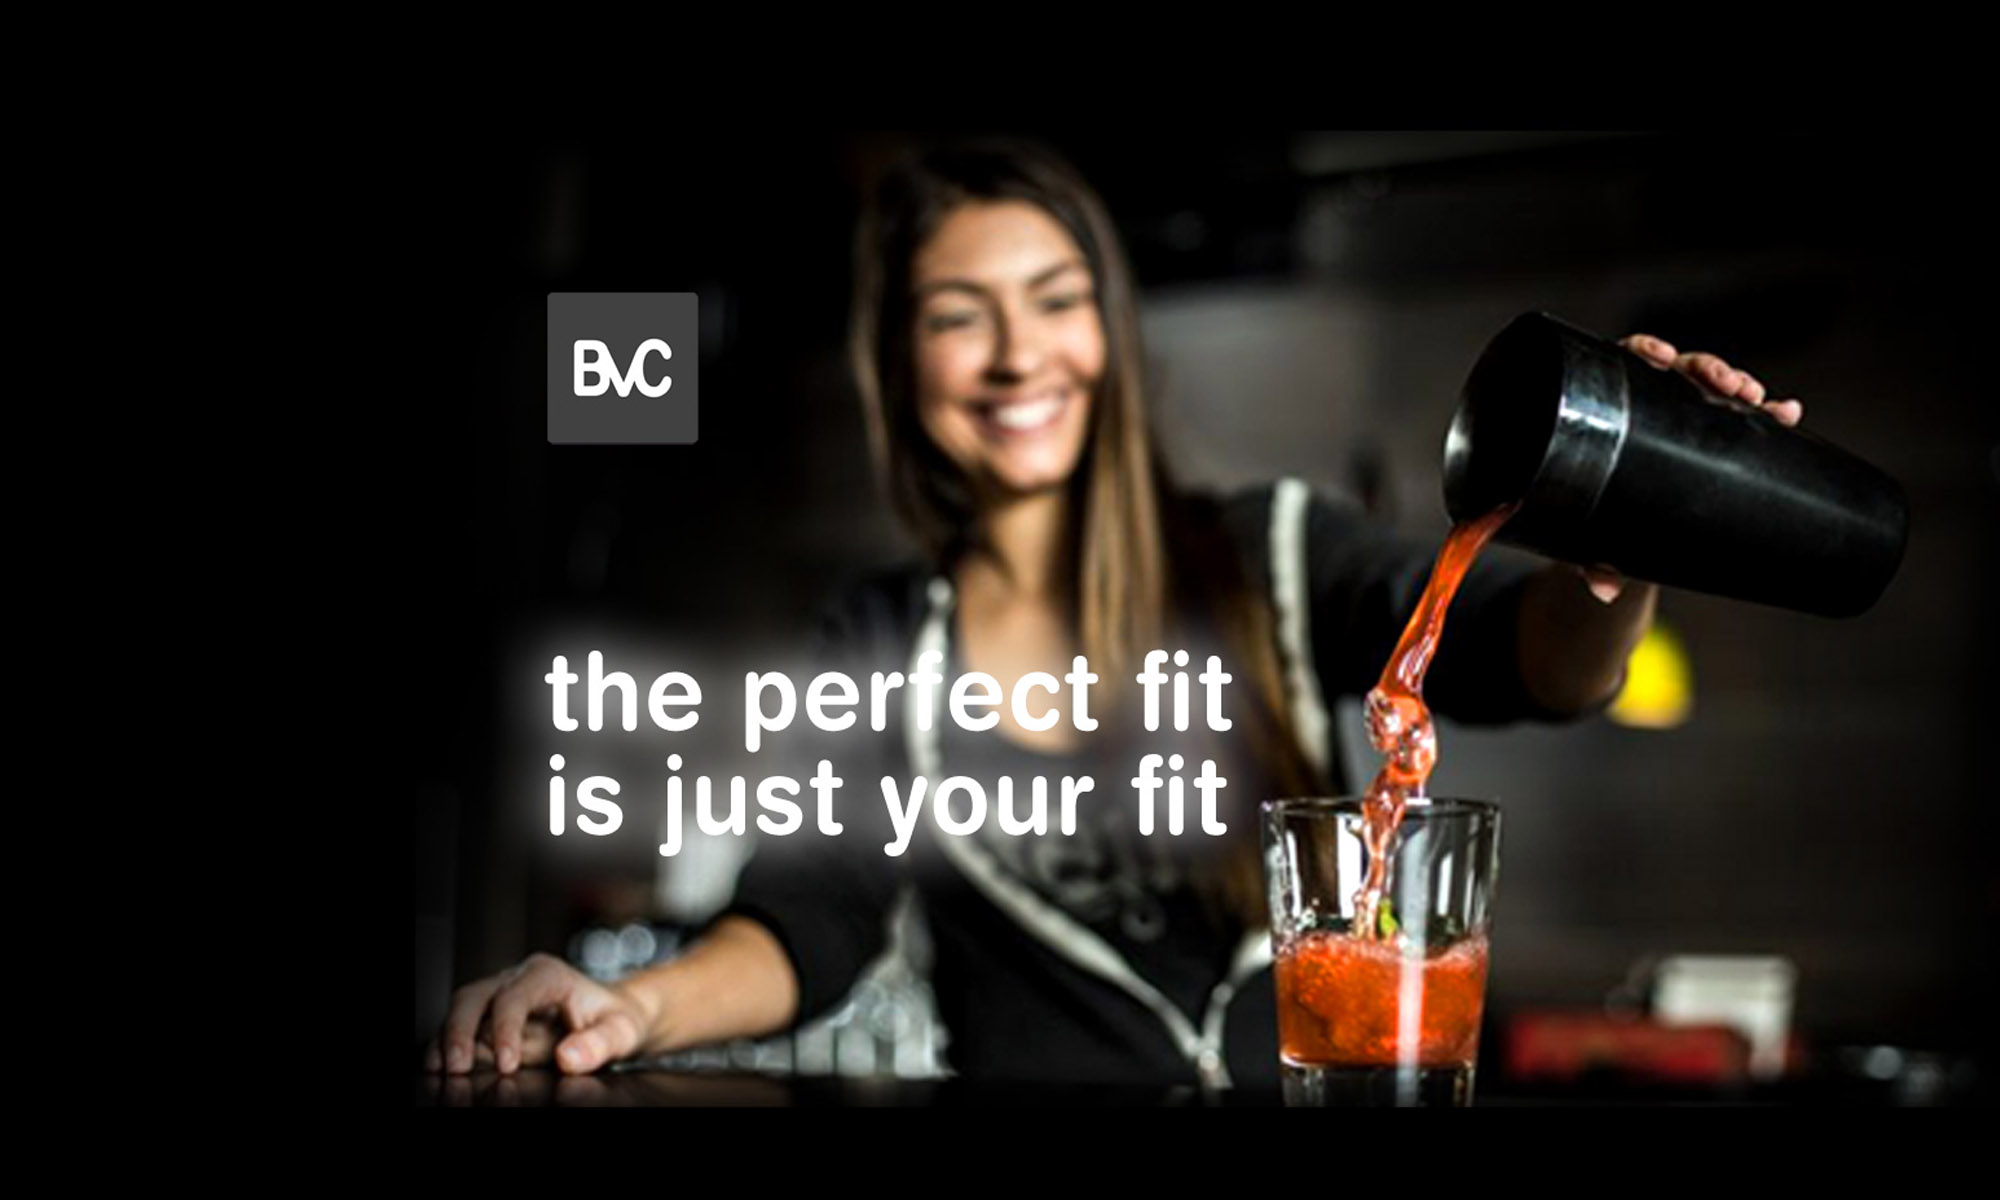 BVC marketing communications, bartender, the perfect fit is just your fit